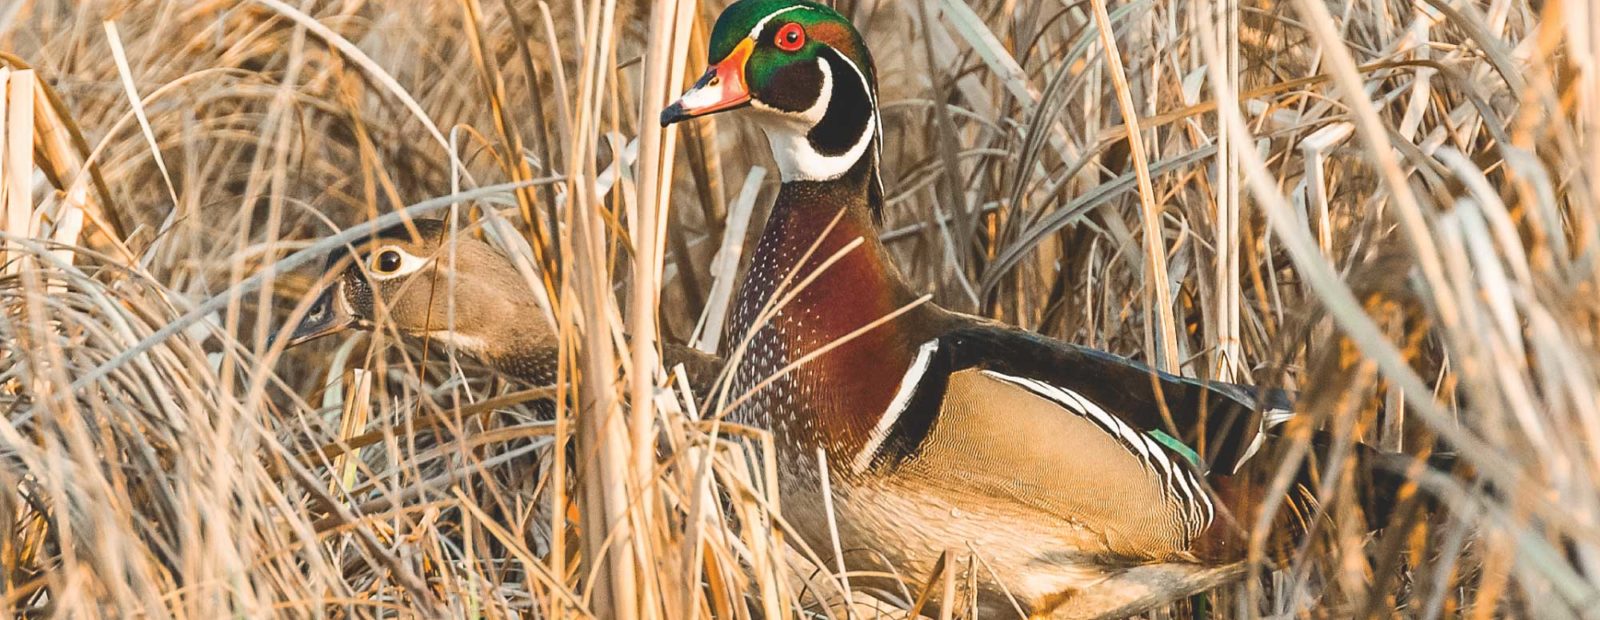 Wood Duck - A Waterfowl Species Profile by Endless Migration